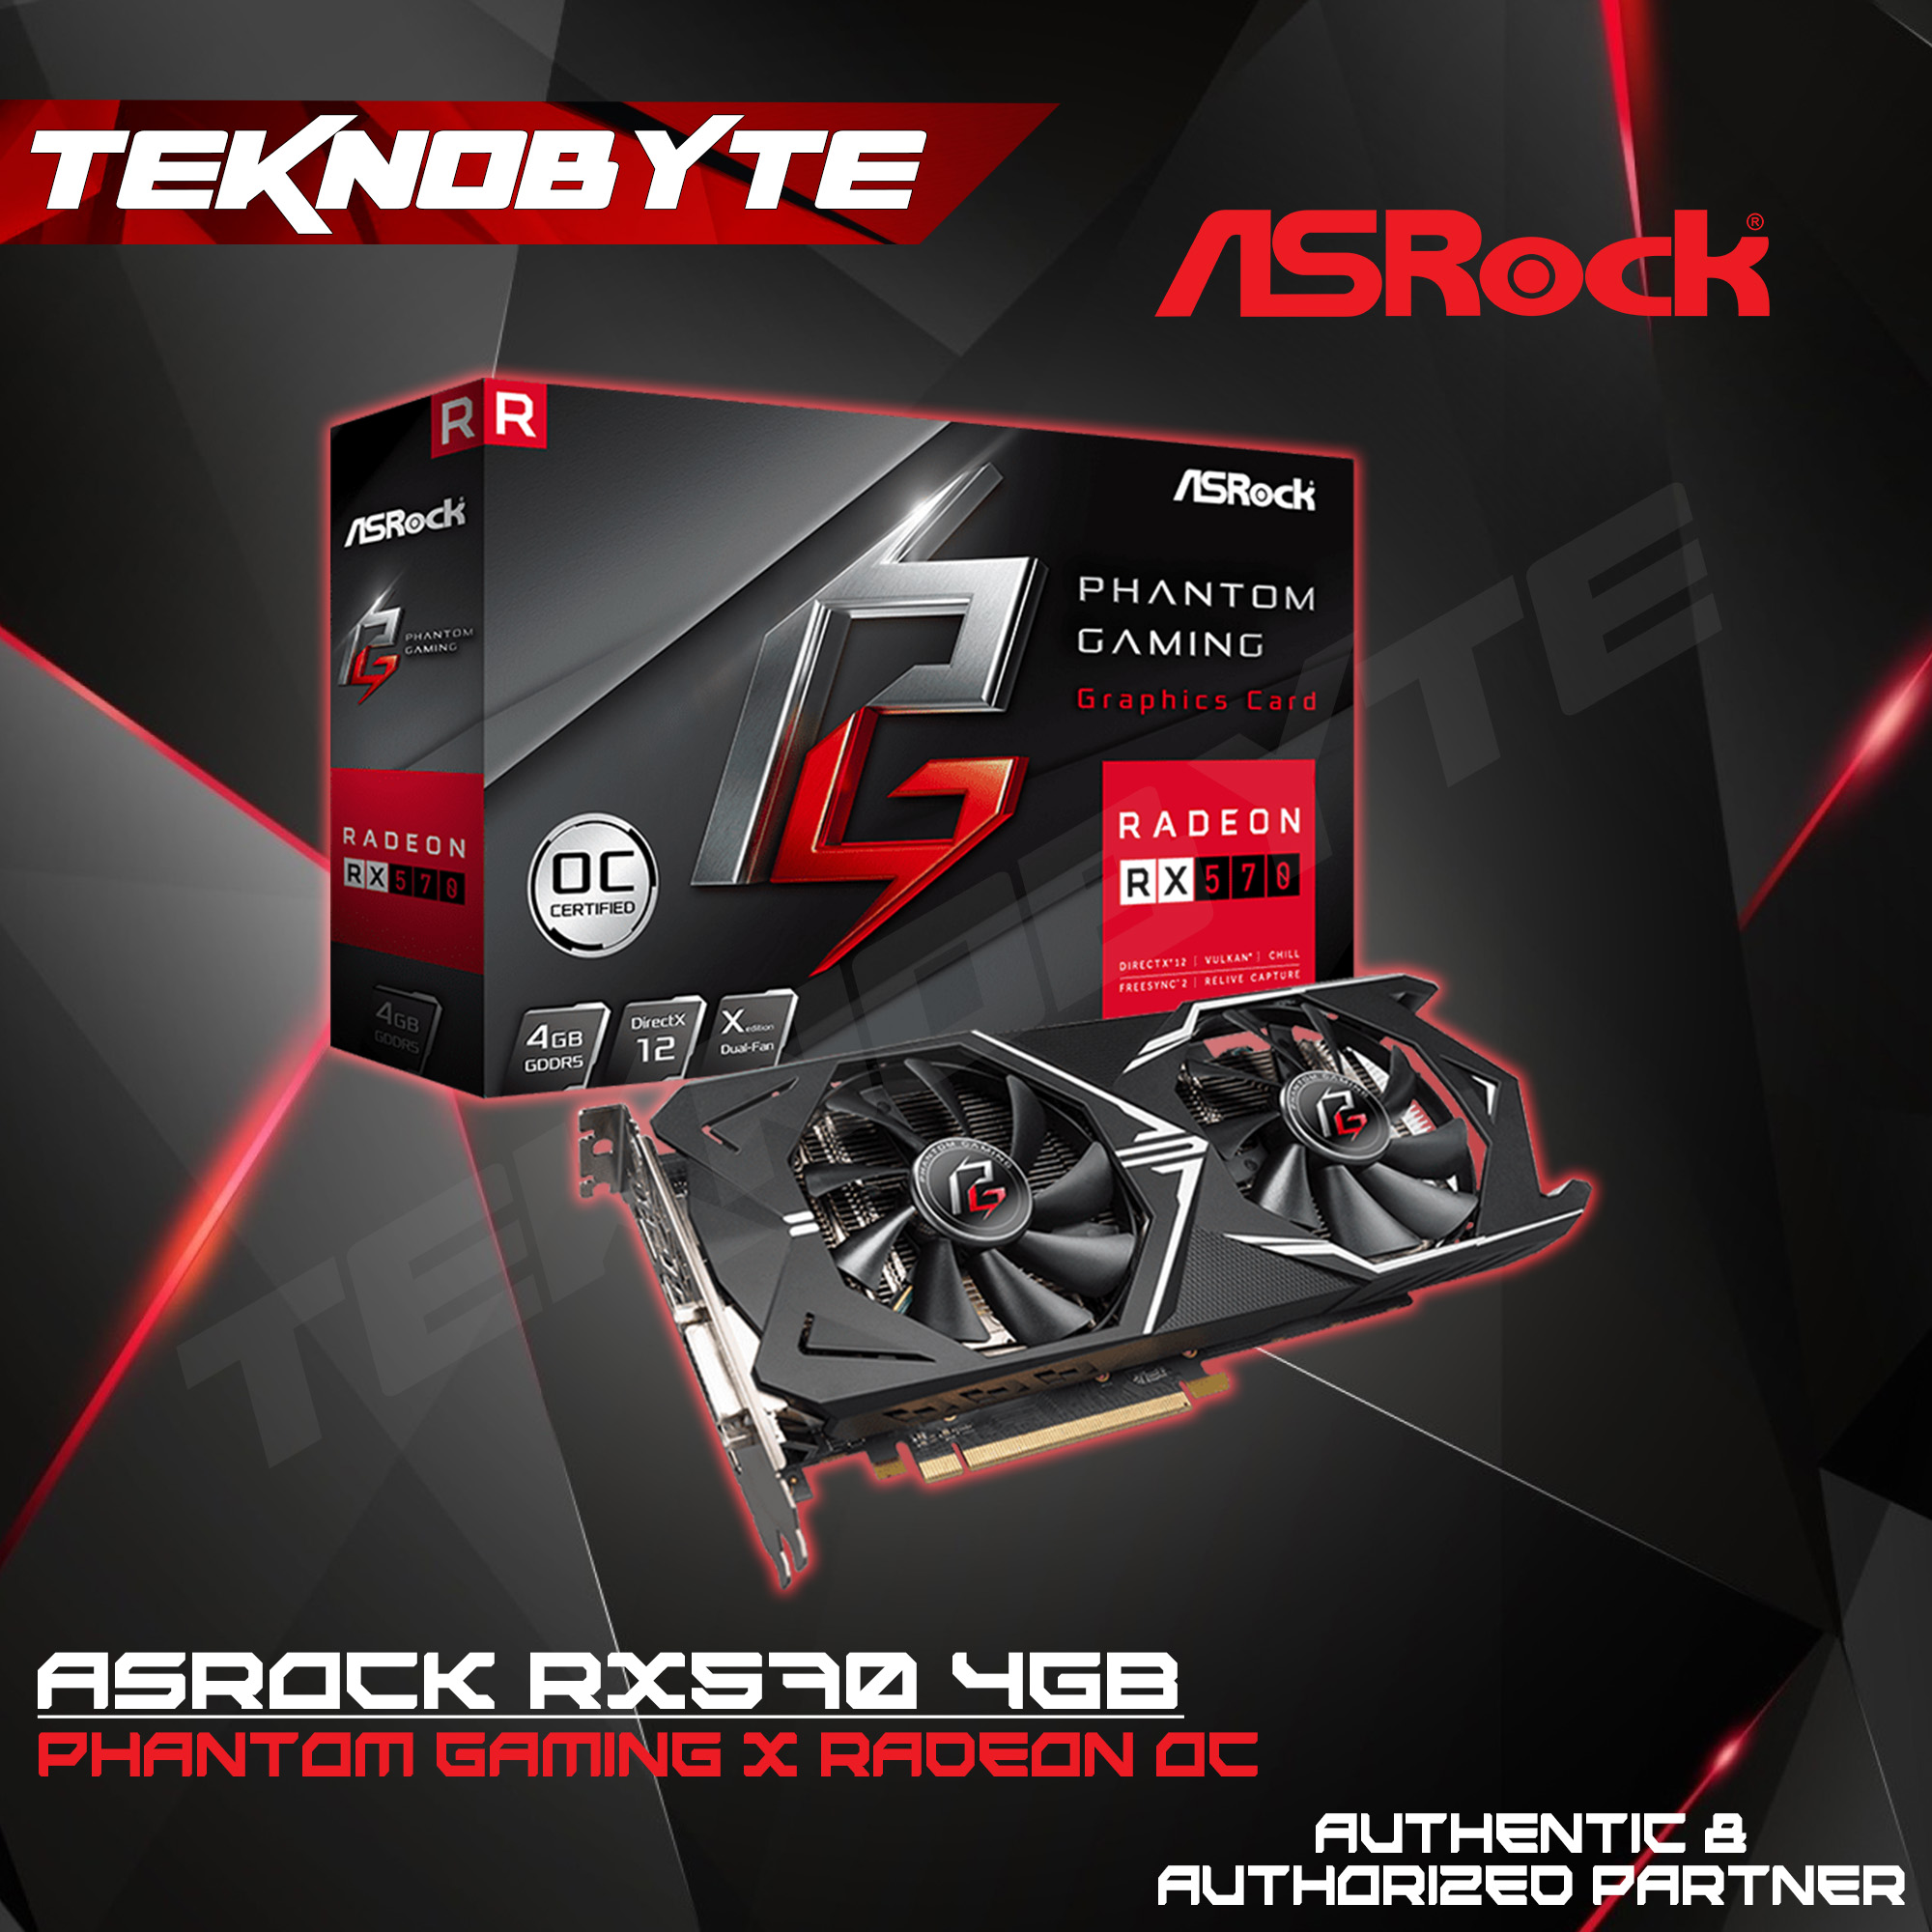 Asrock Phantom Gaming Rx 570 Shop Asrock Phantom Gaming Rx 570 With Great Discounts And Prices Online Lazada Philippines